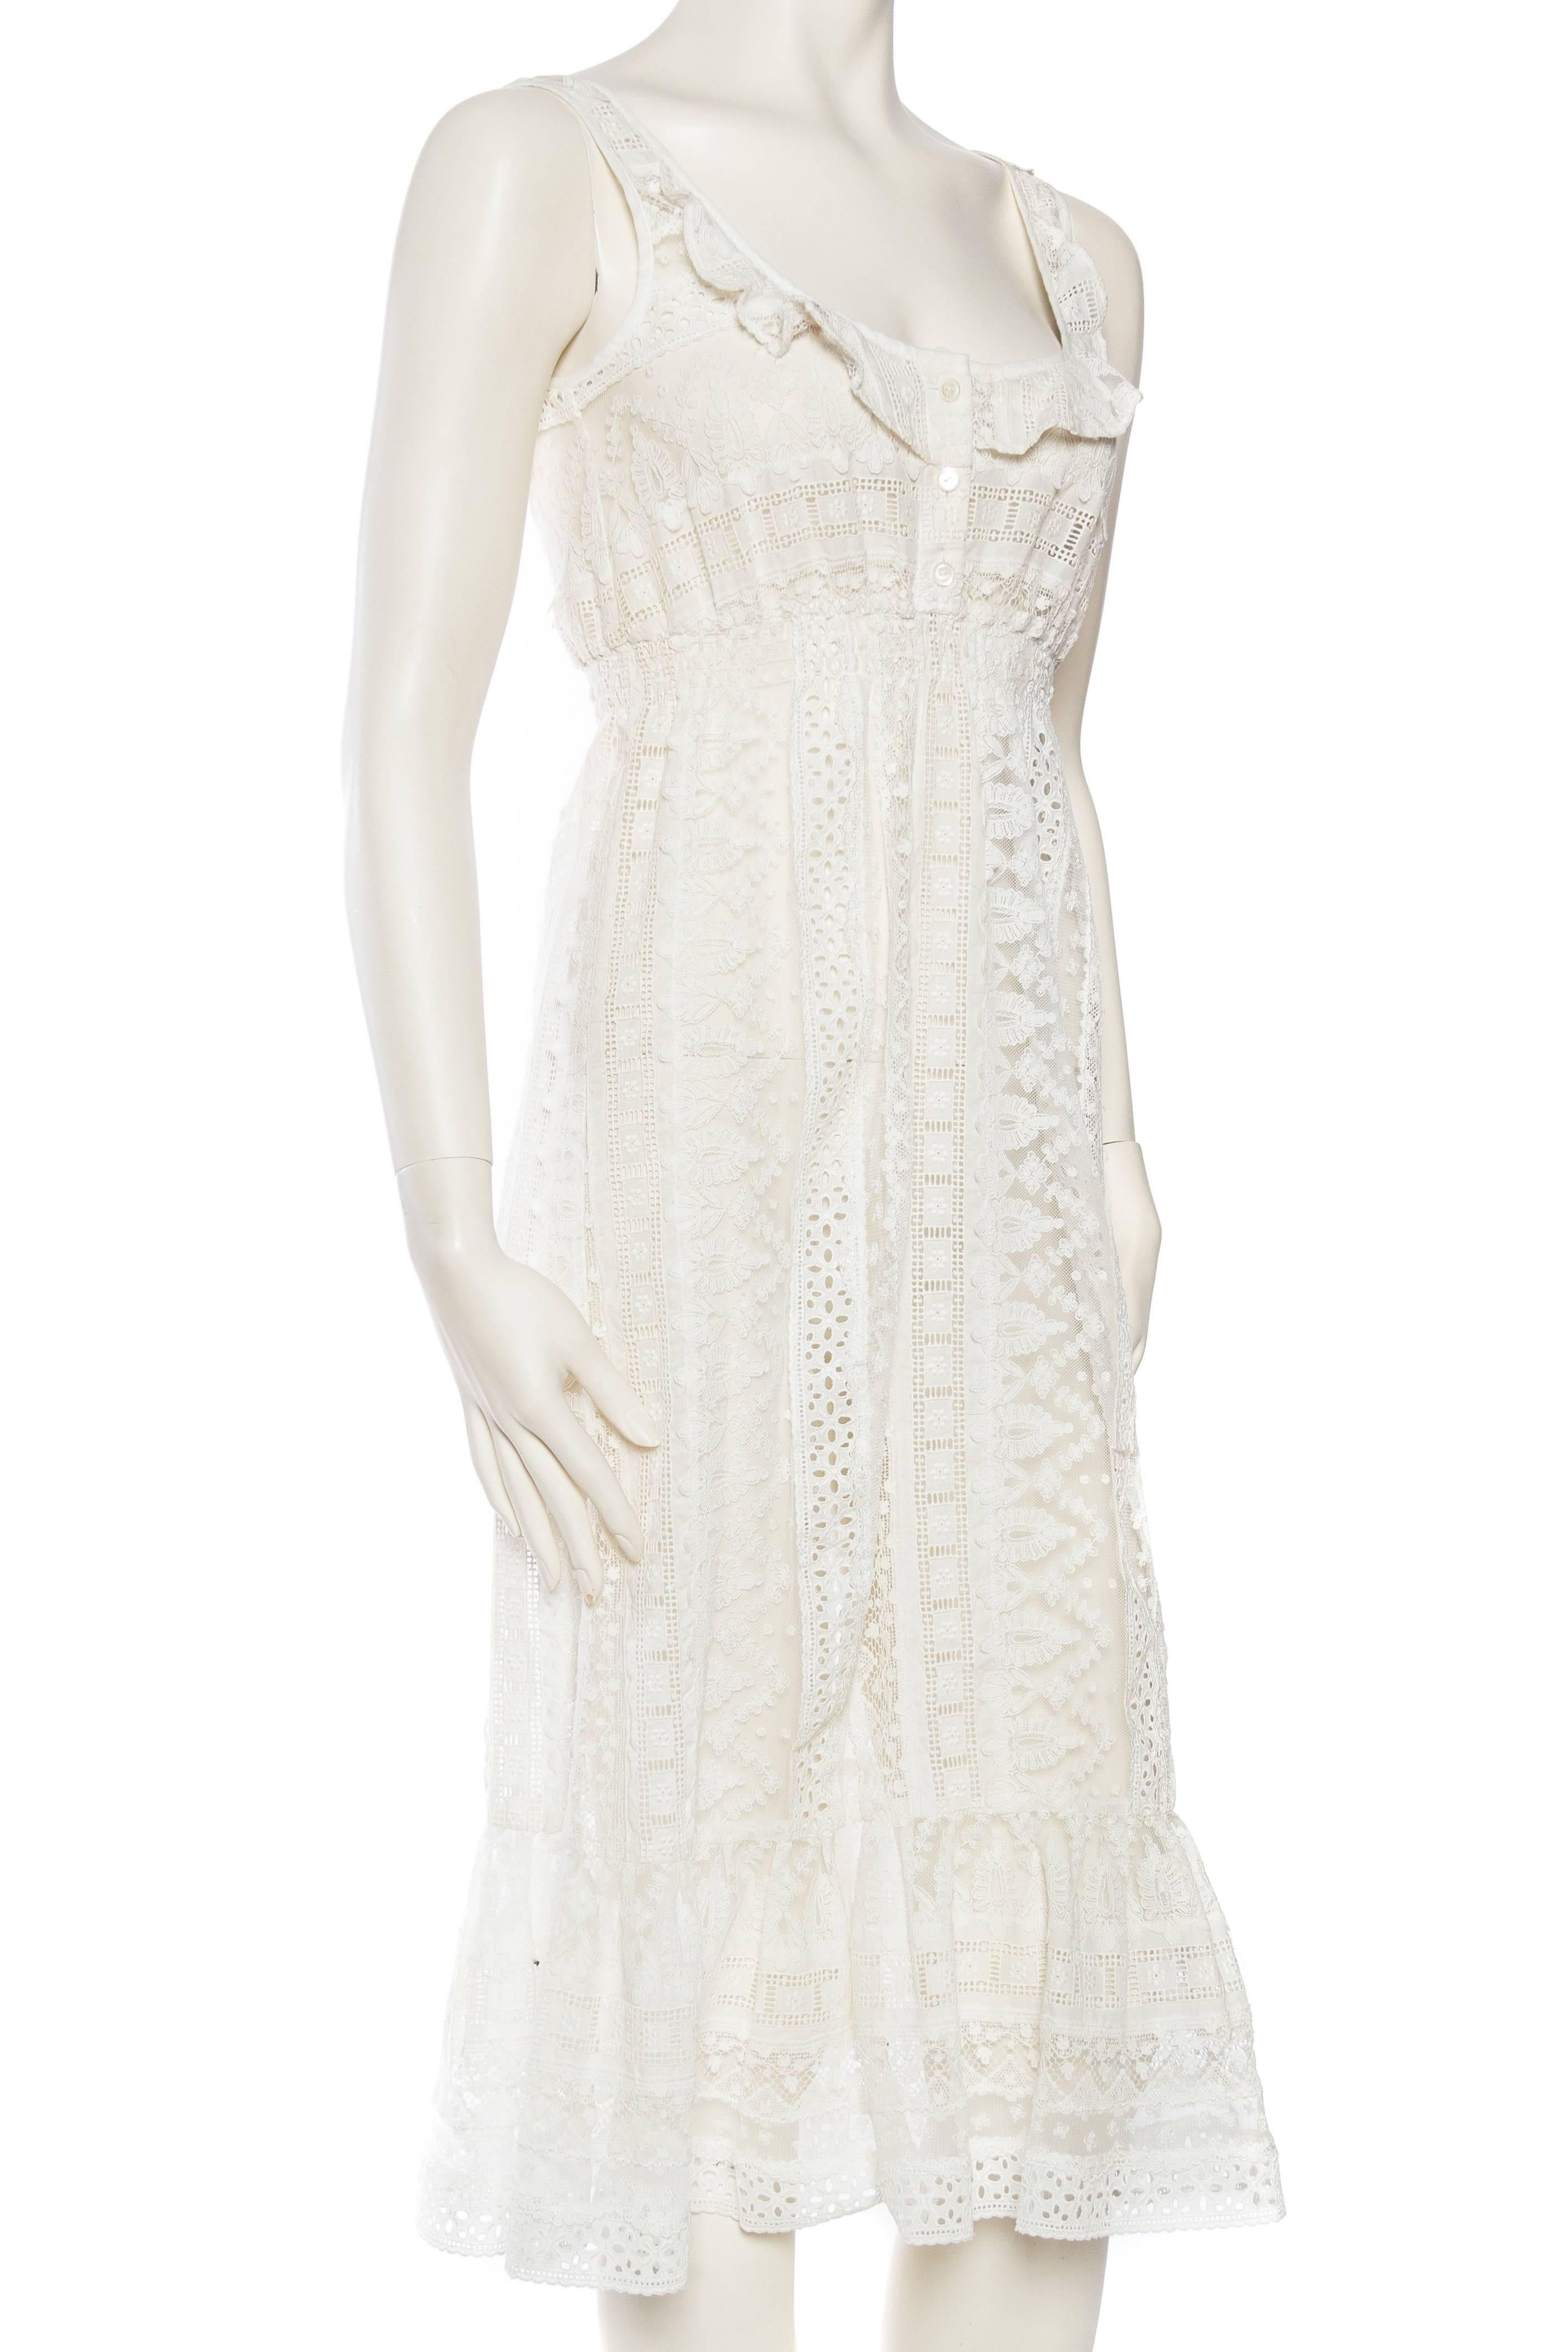 Edwardian Style Cotton Eyelet Lace Dress In Excellent Condition In New York, NY